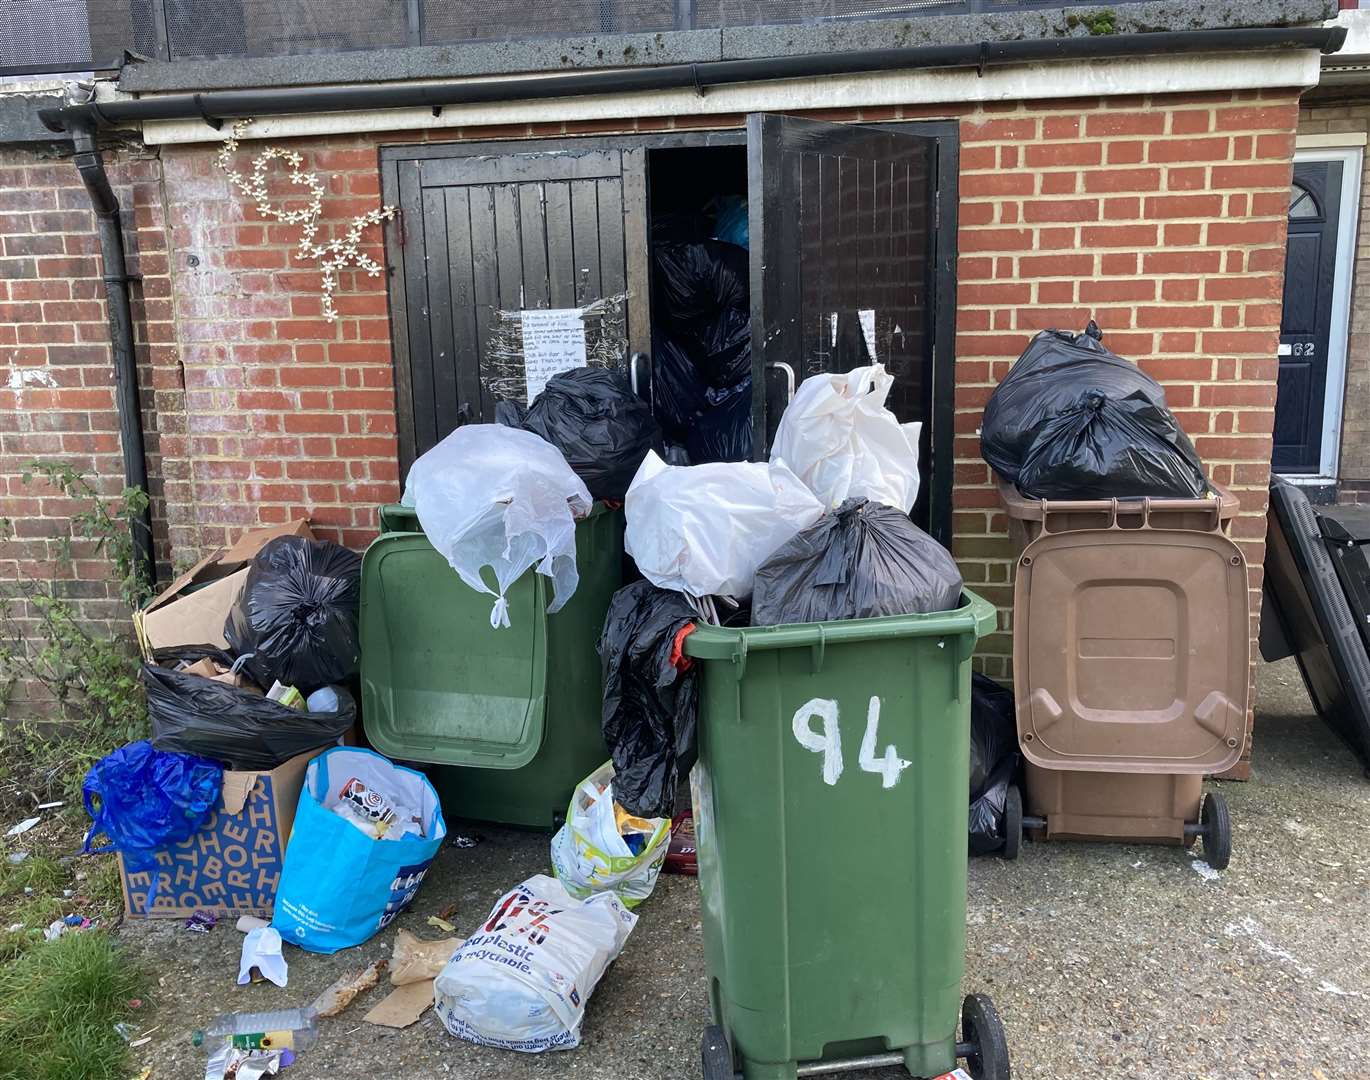 Bins have not been collected at the block of flats in Shakespeare Road, Temple Hill. Photo: Andy Newman